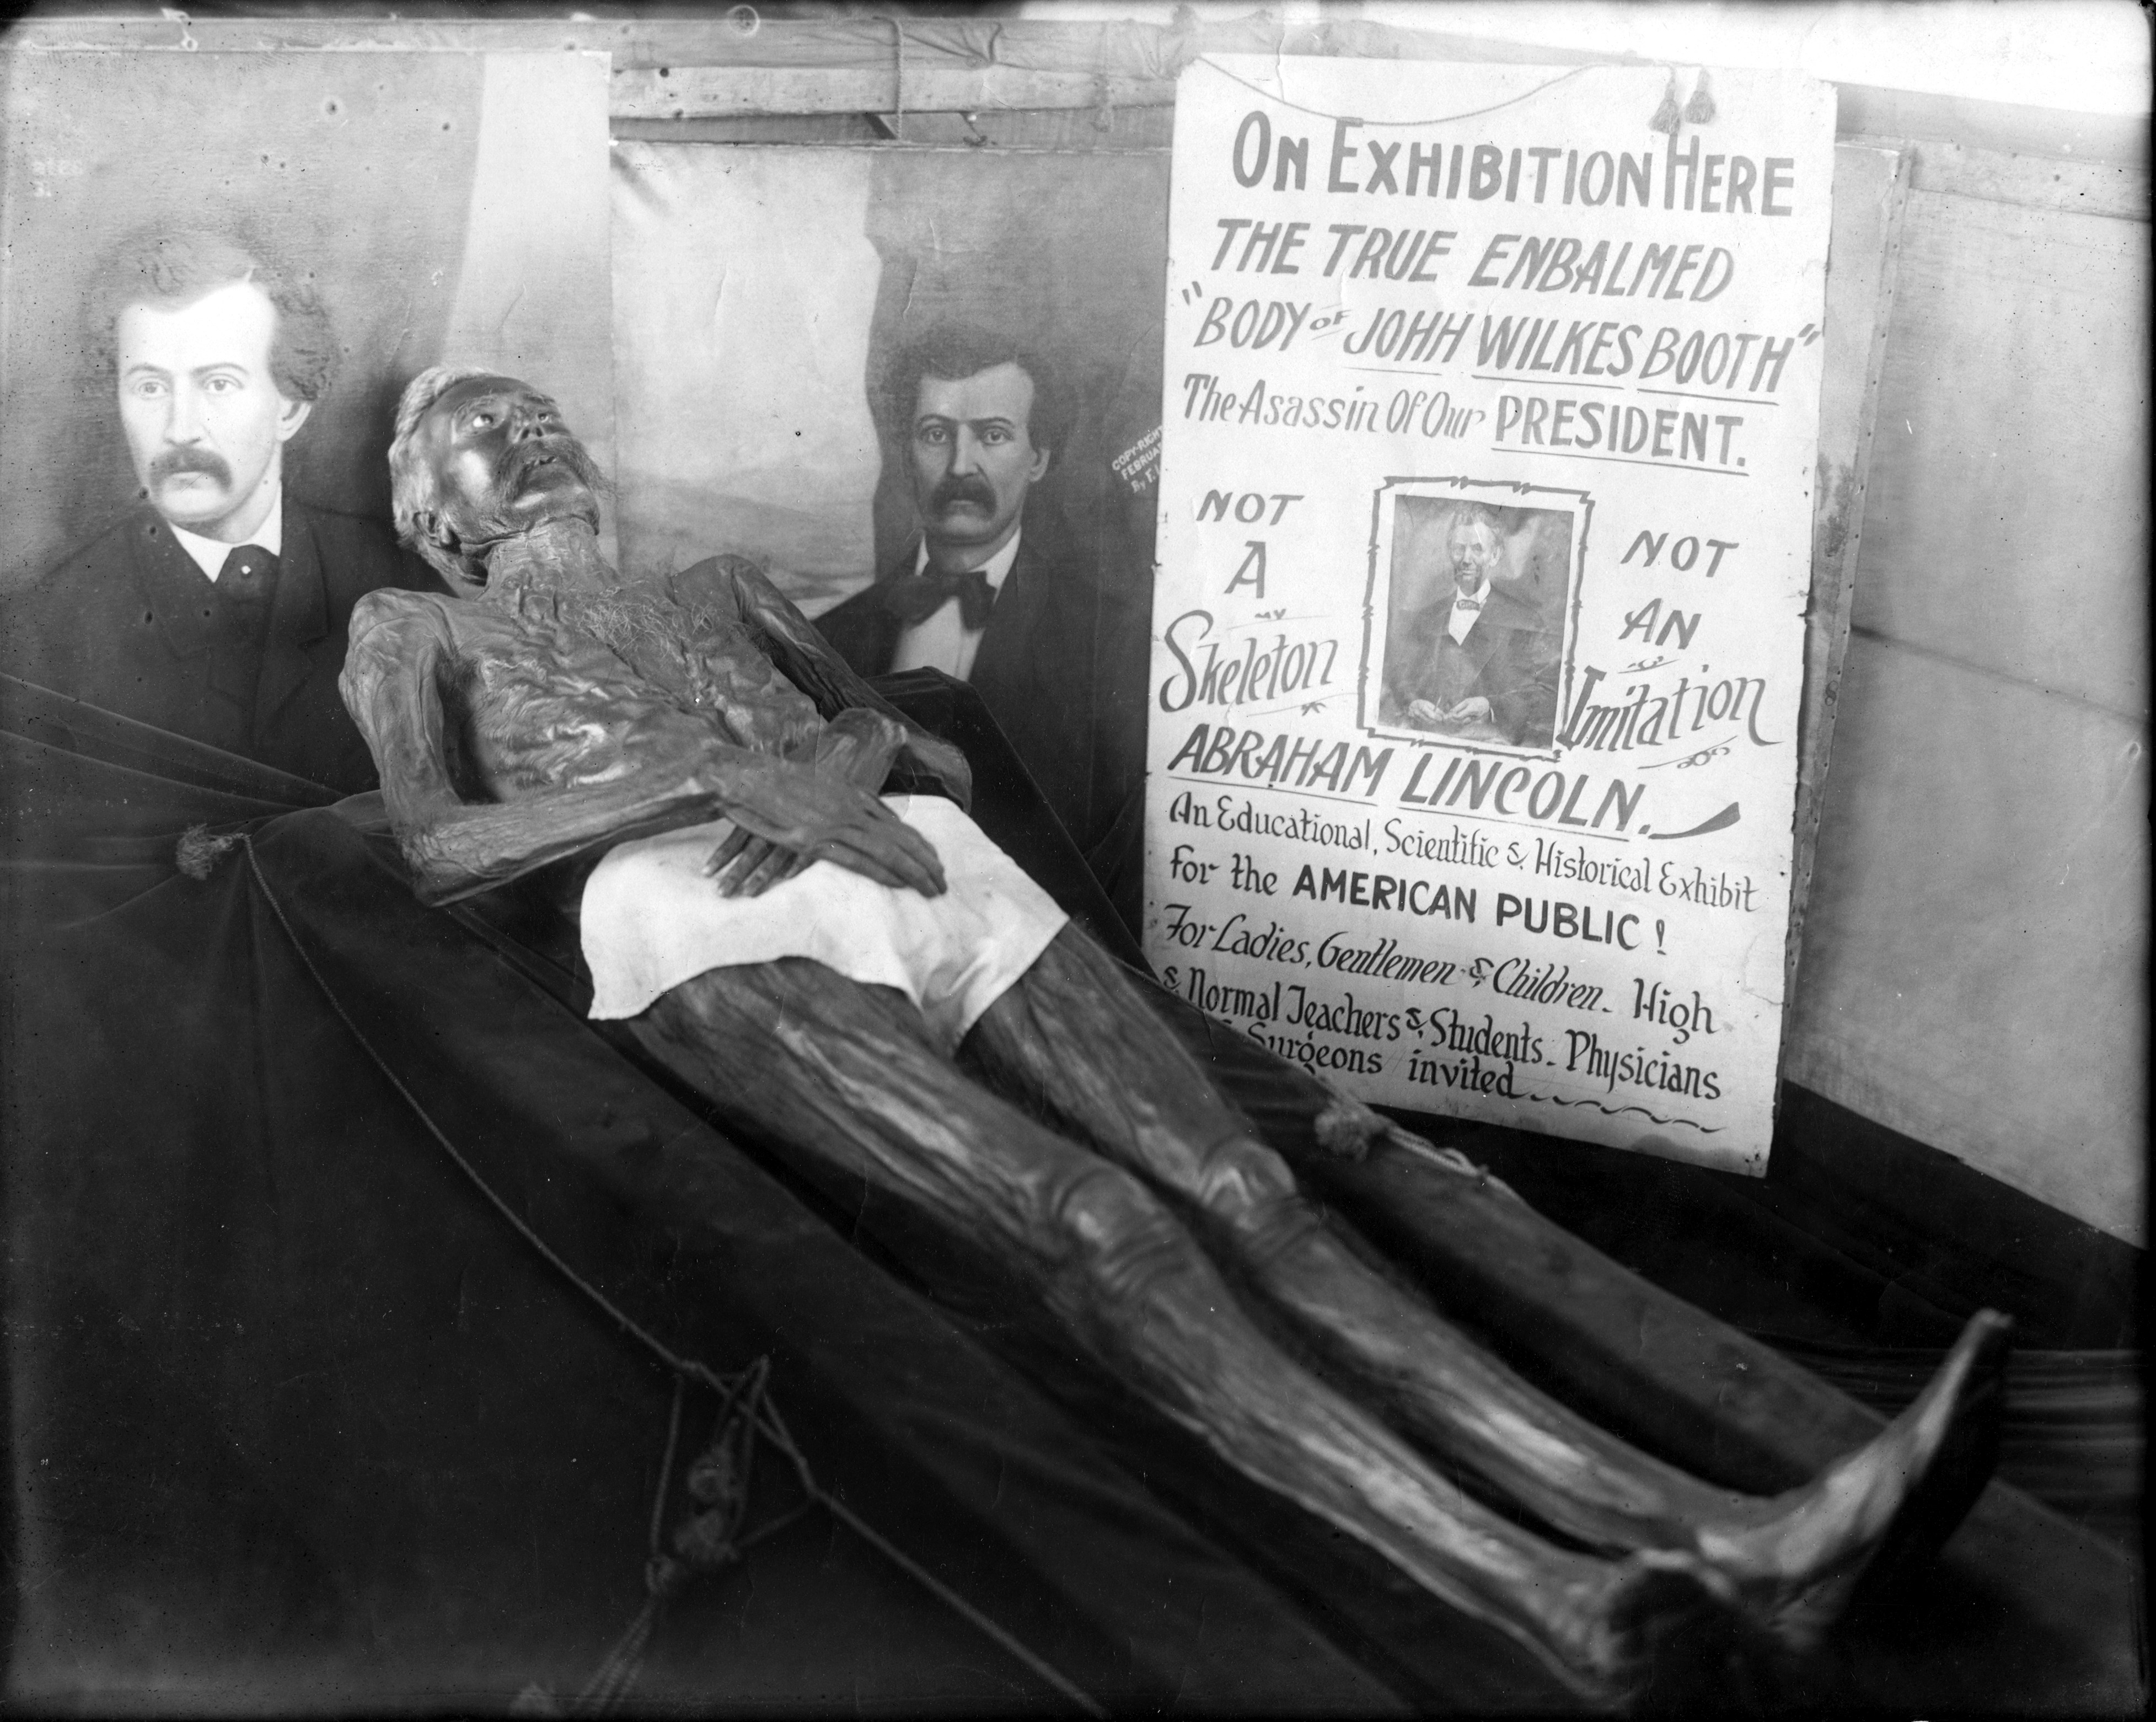 Black and white photo of exhibit purporting to show the mummified corpse of John Wilkes Booth.